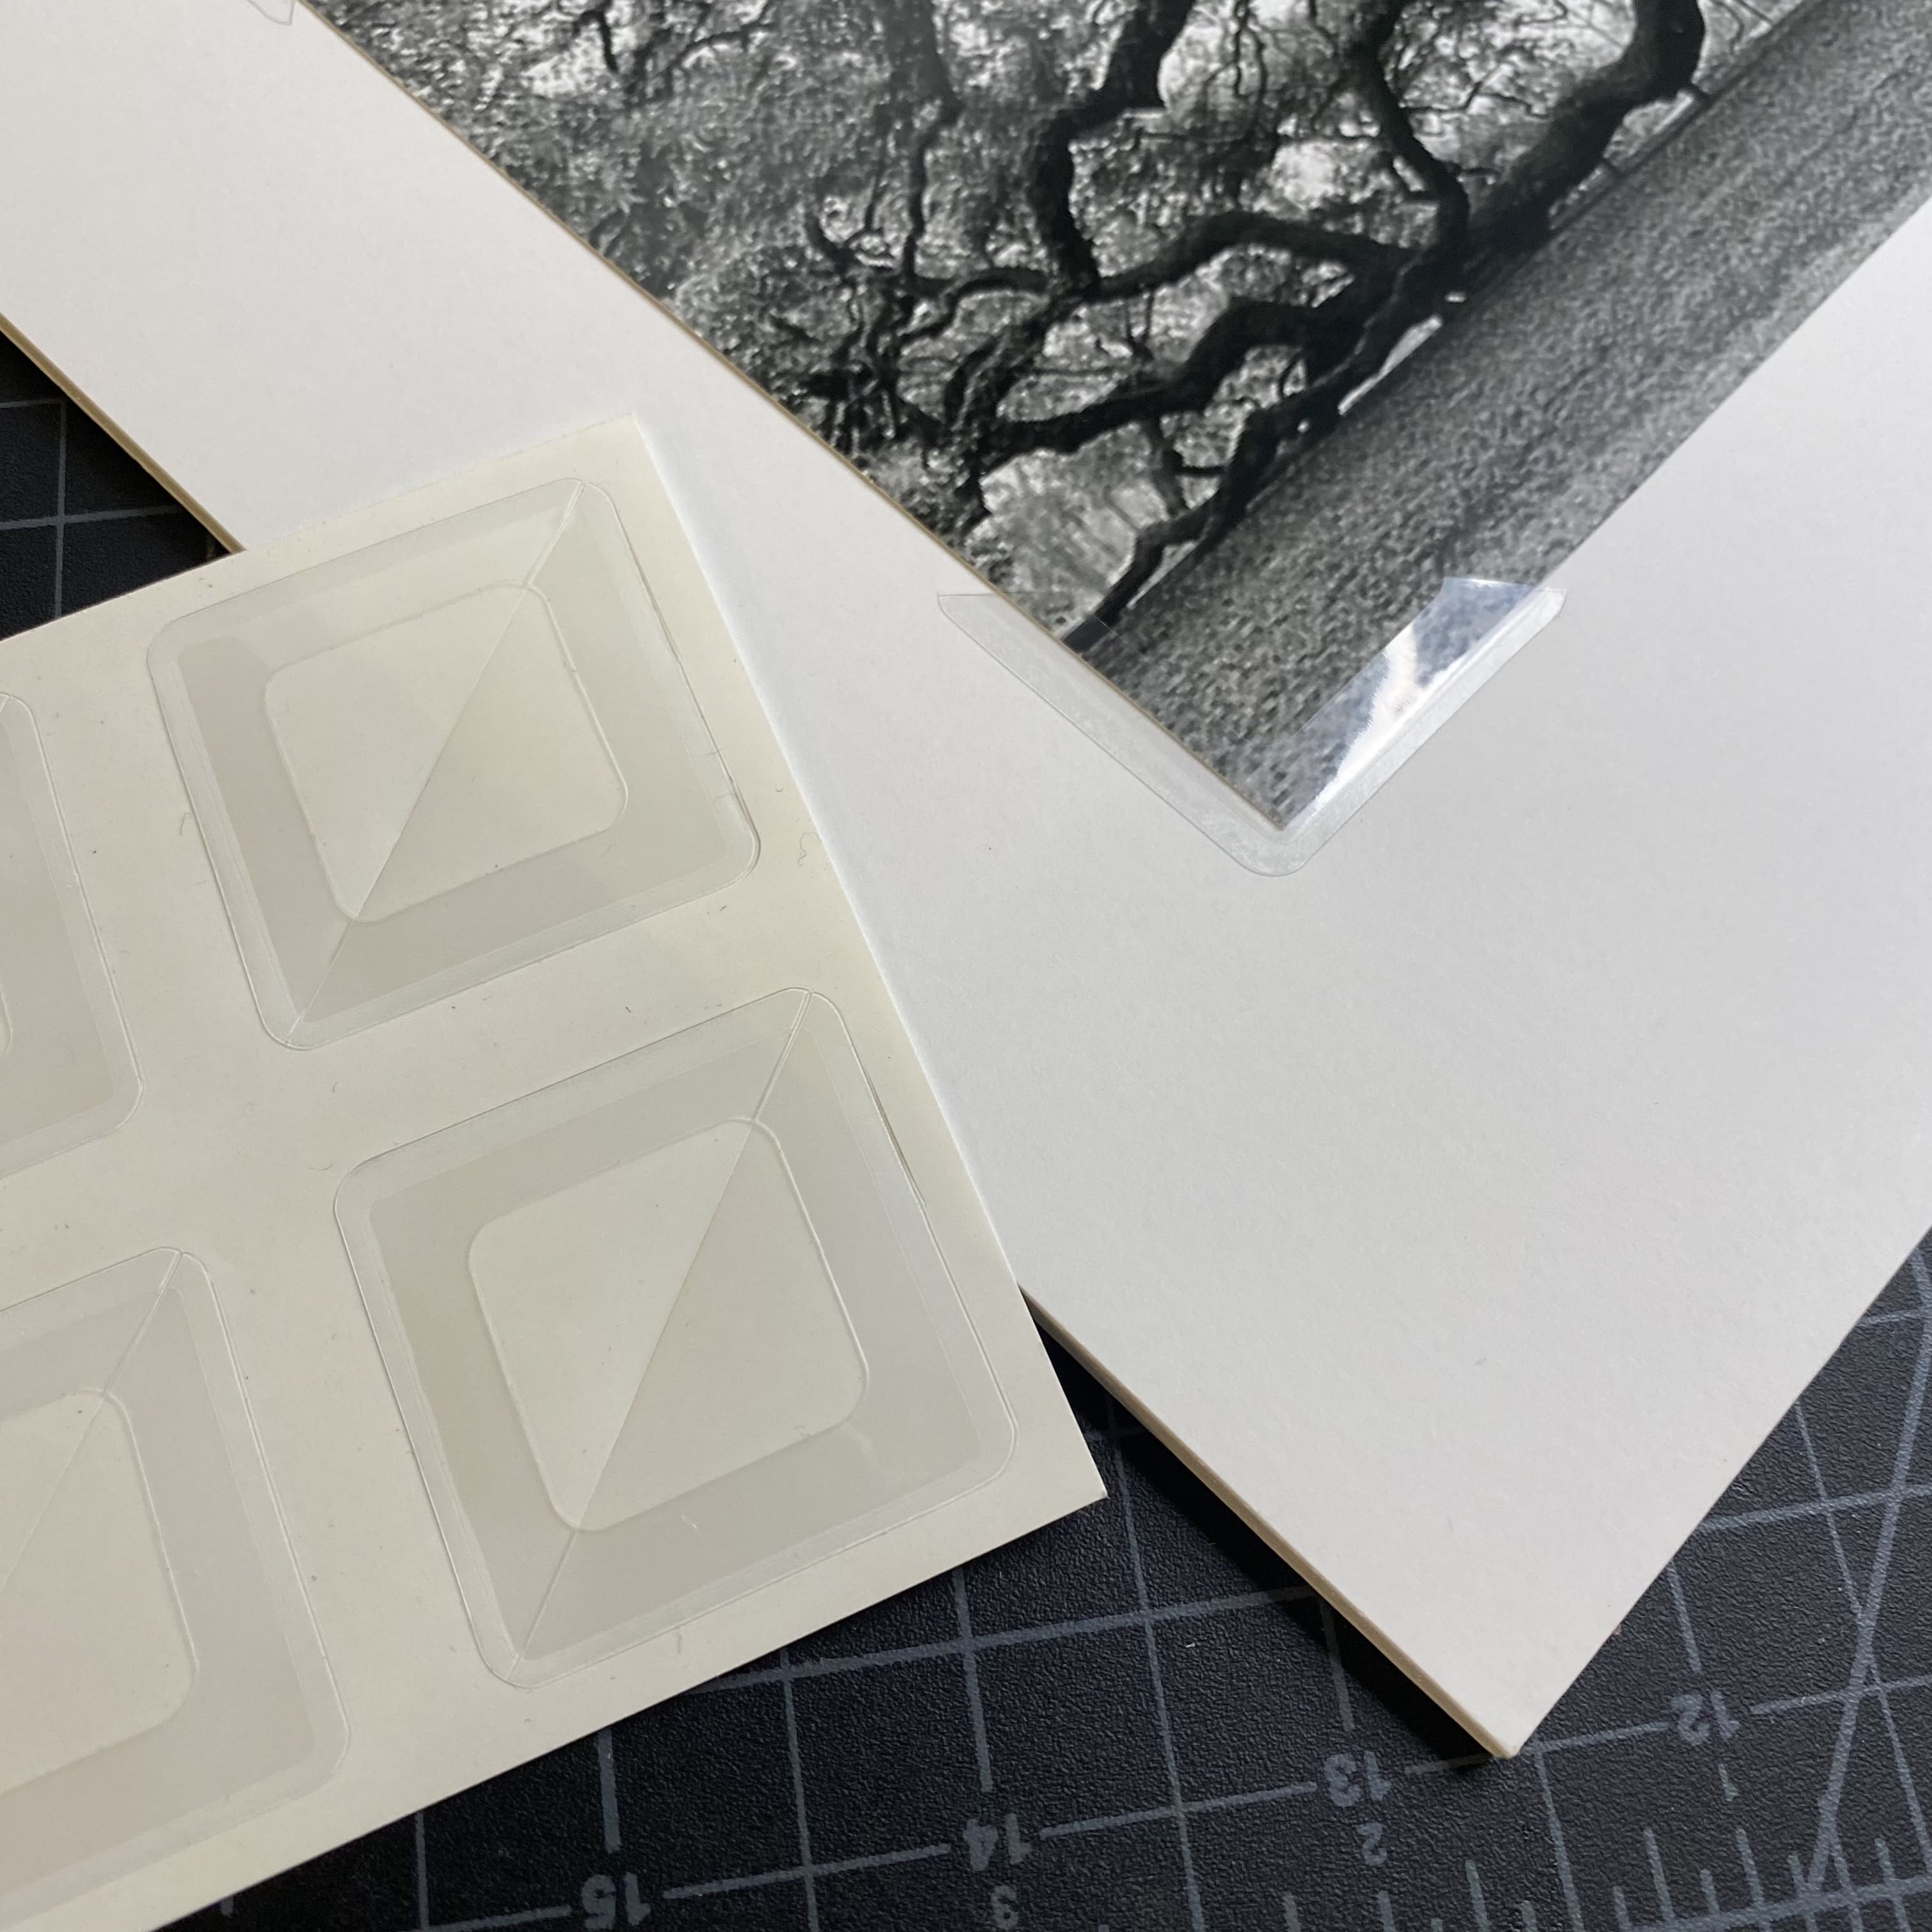 How to Use Clear Lineco Photo Corners to Mount Your Print 